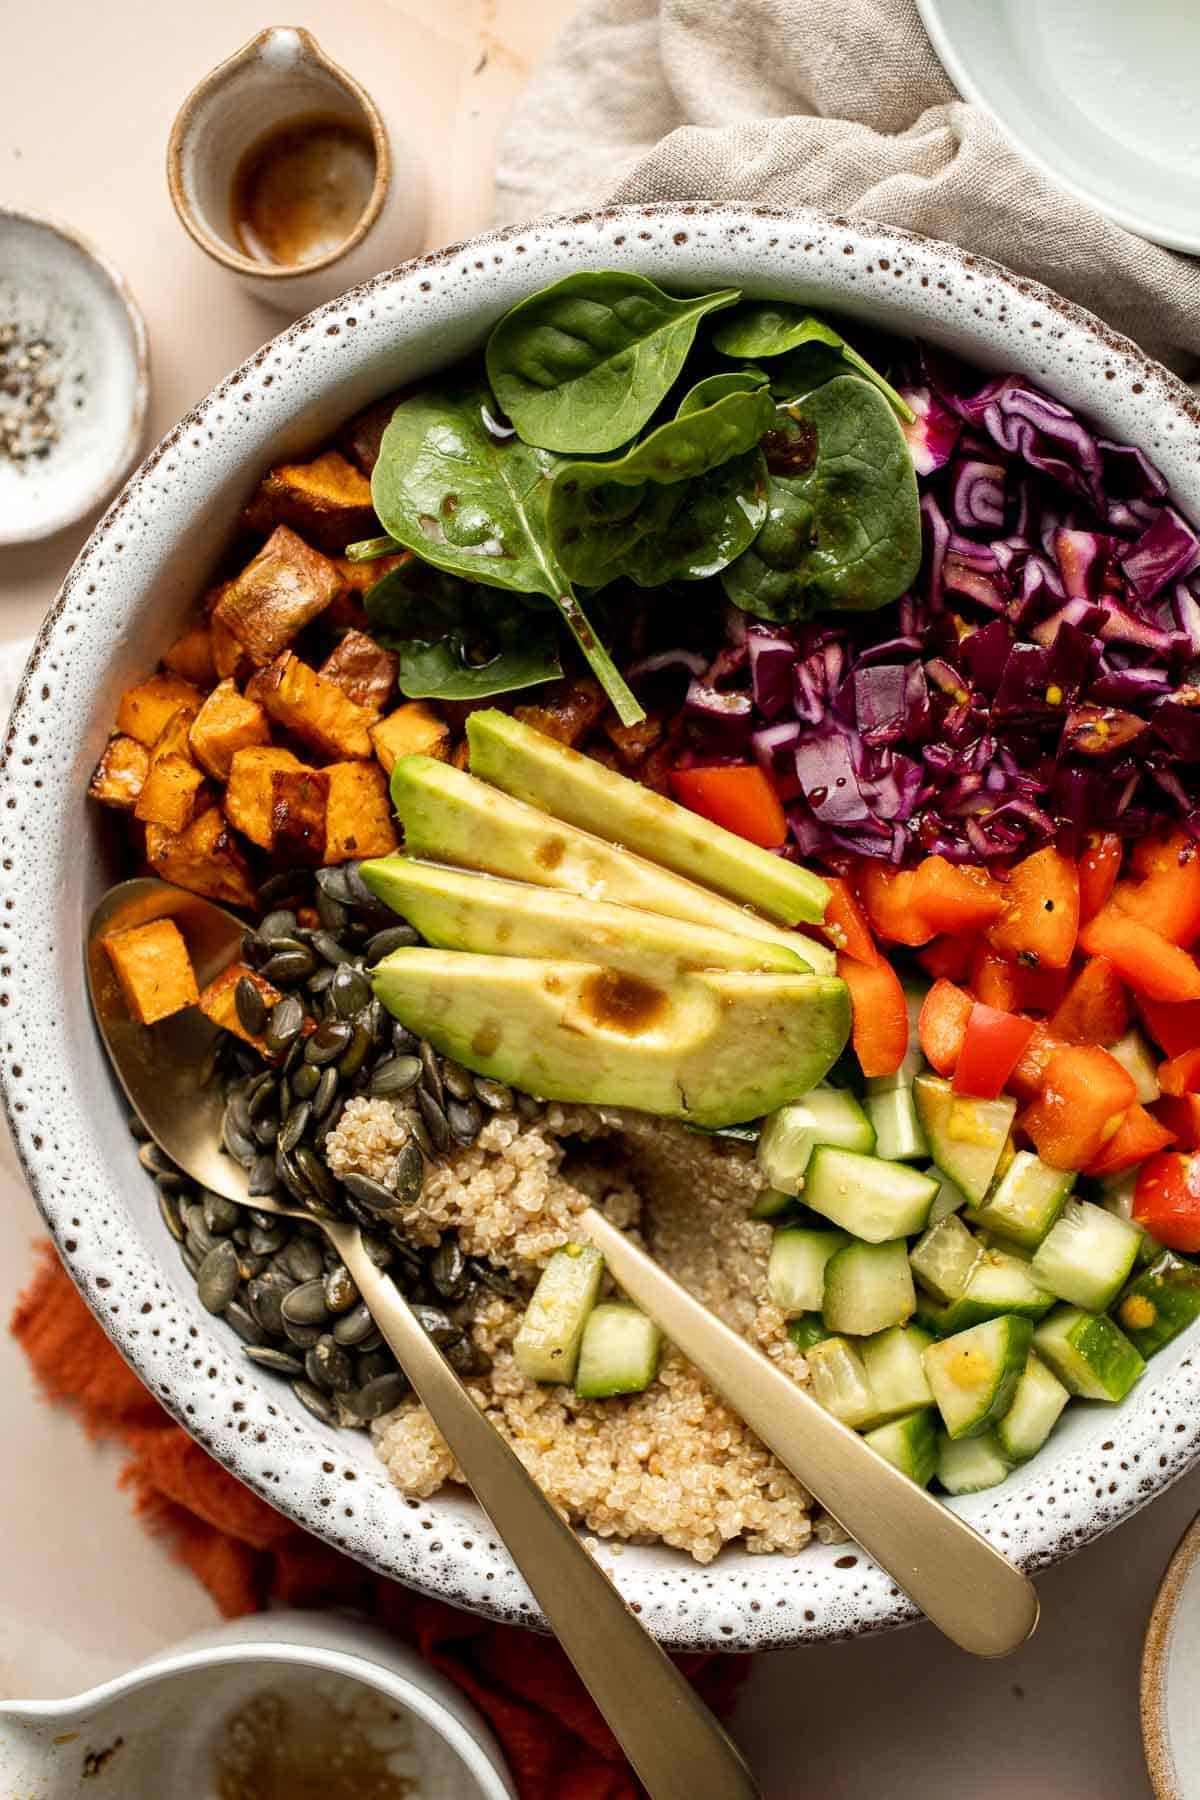 This vegan Buddha Bowl is the perfect hybrid of a salad and grain bowl that is packed with nutritious ingredients like grains, vegetables, and protein. | aheadofthyme.com